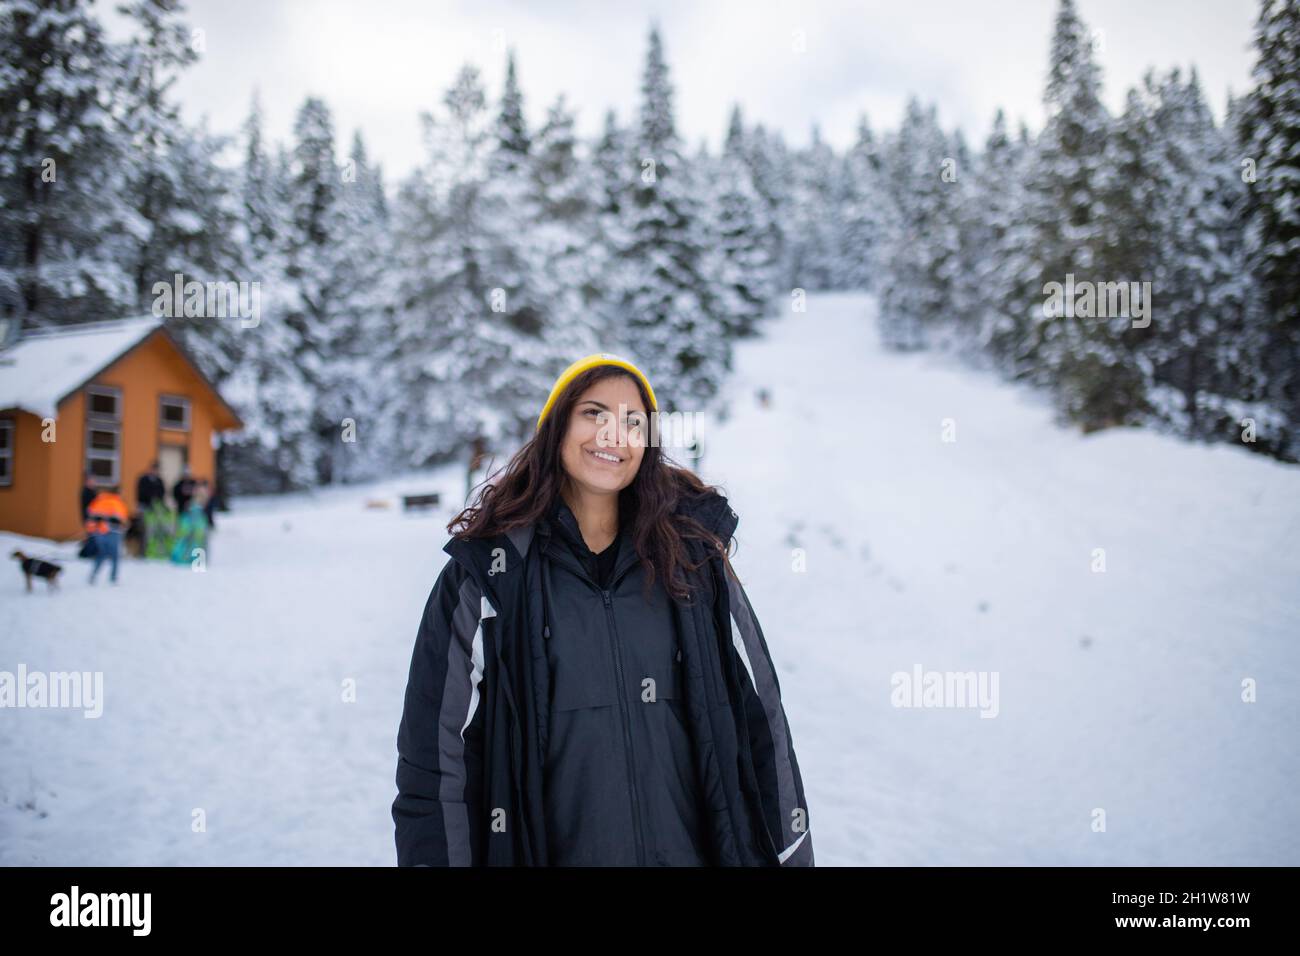 Happy woman standing with a beautiful snowy forest and small cabin as background. Smiling woman surrounded by snowy pine trees. Adventurous winter hol Stock Photo